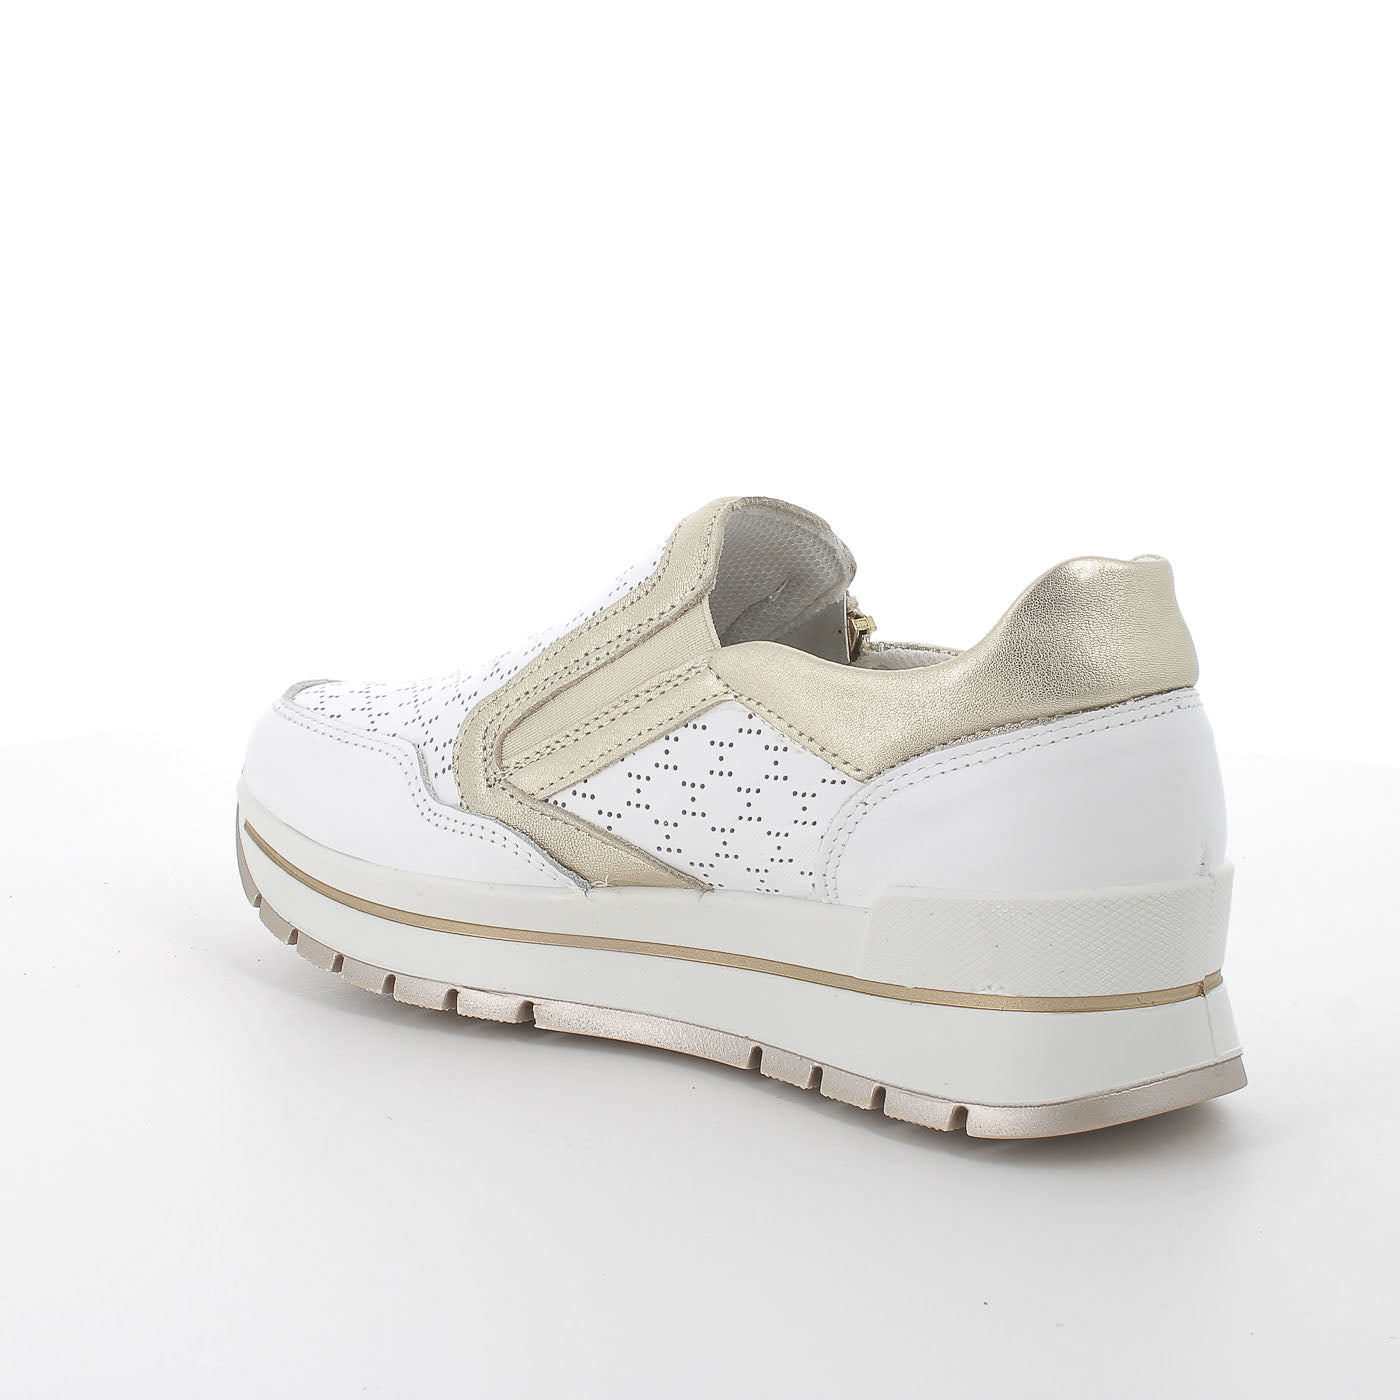  Perspective highlighting the white base with hints of gold and stylish sole.